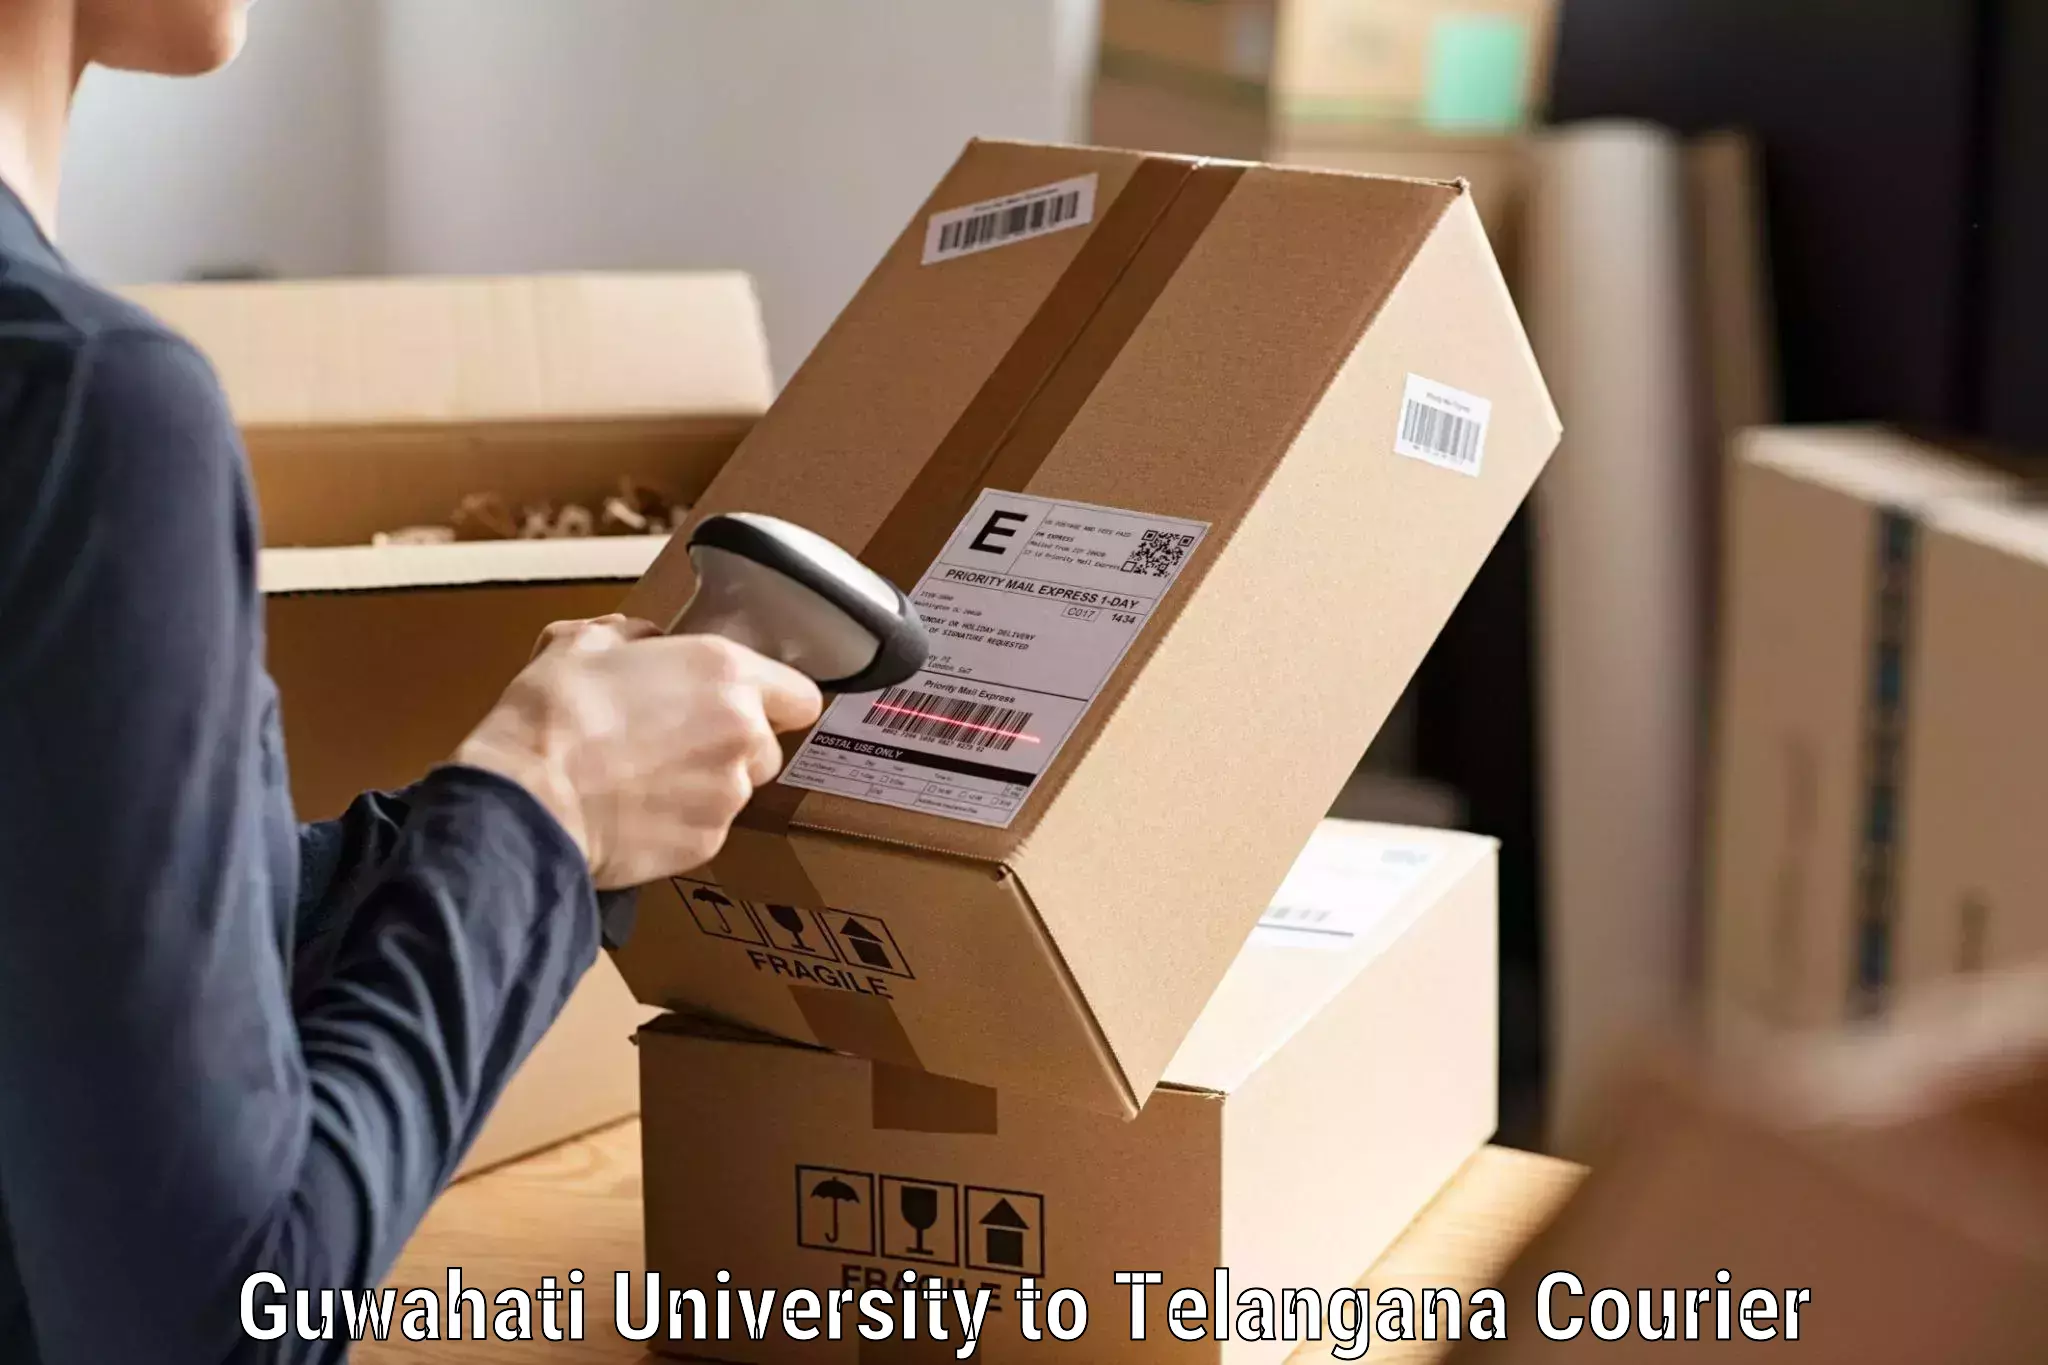 Reliable courier service Guwahati University to Osmania University Hyderabad